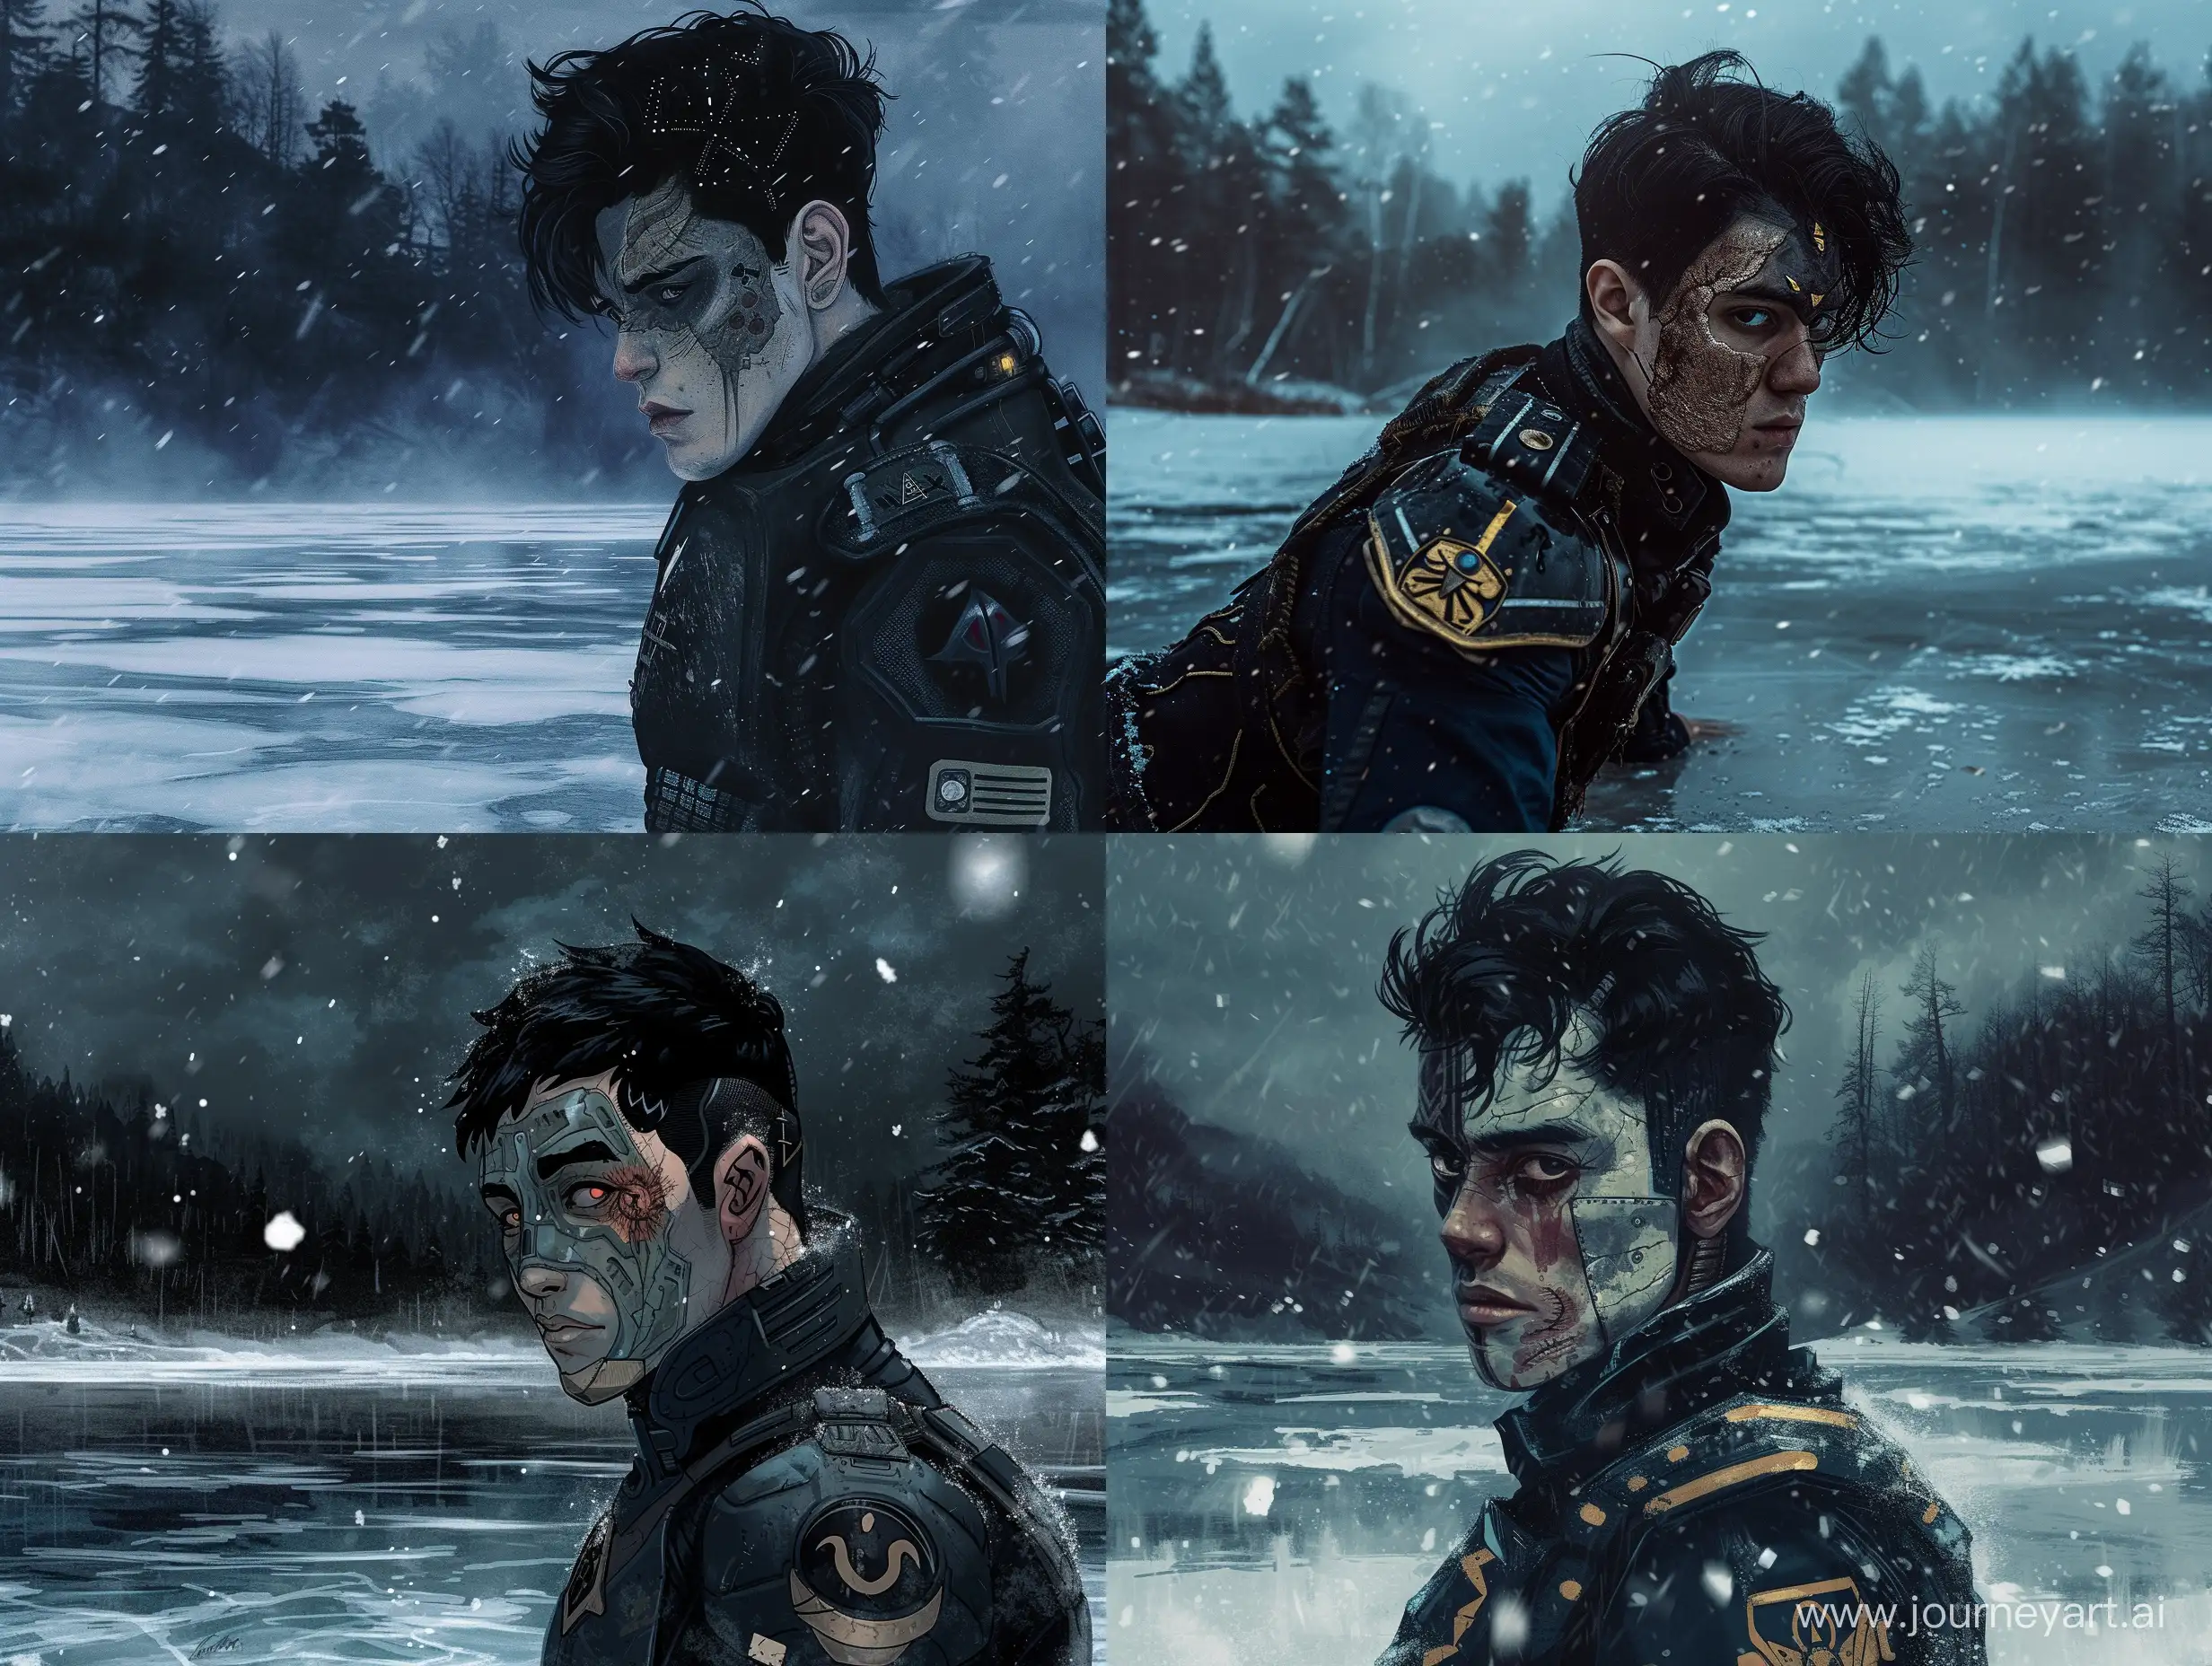 SciFi-Warrior-with-Scar-on-Icy-Lake